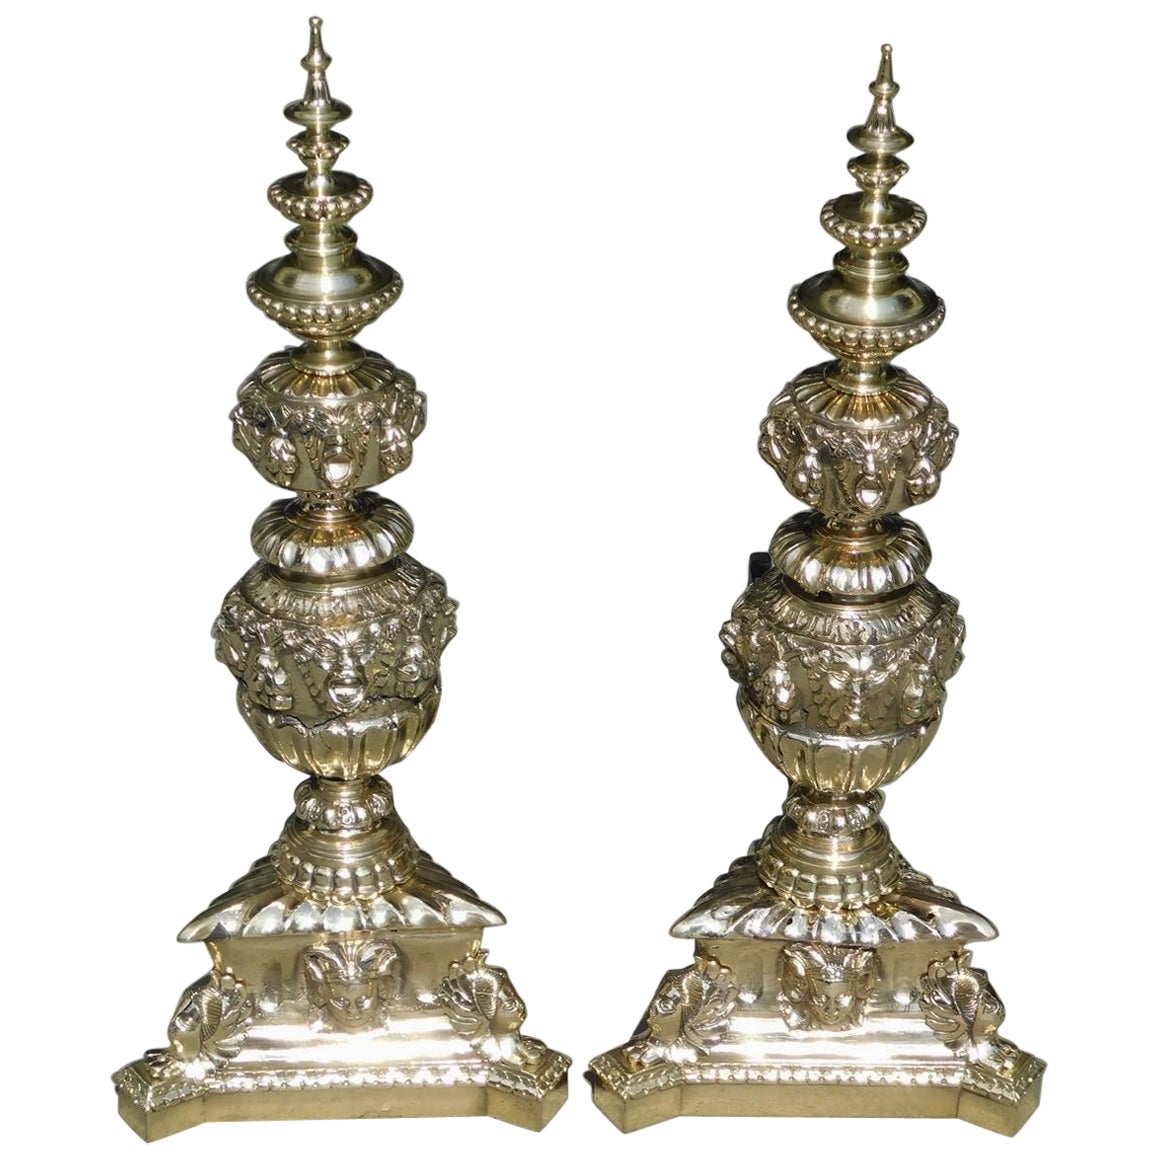 Pair of Italian Brass Neoclassical Figural Tiered Urn Finial Andirons, C. 1820 For Sale